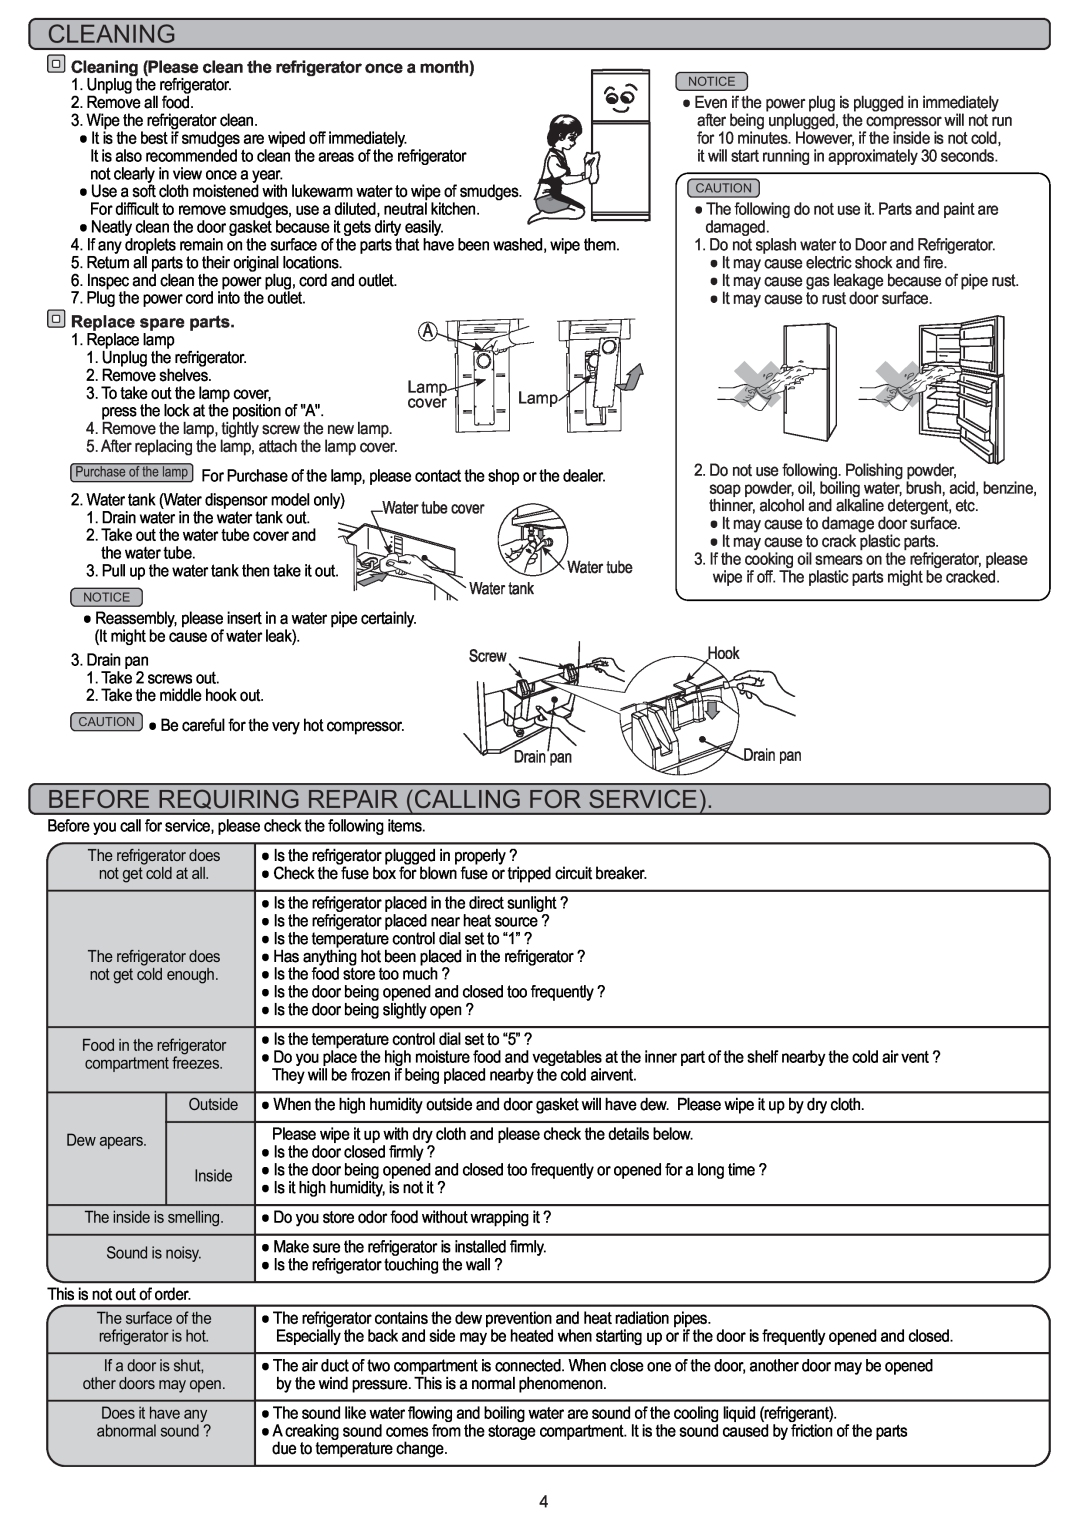 Hitachi refrigerator instruction manual Cleaning, Before Requiring Repair Calling For Service, Replace spare parts 